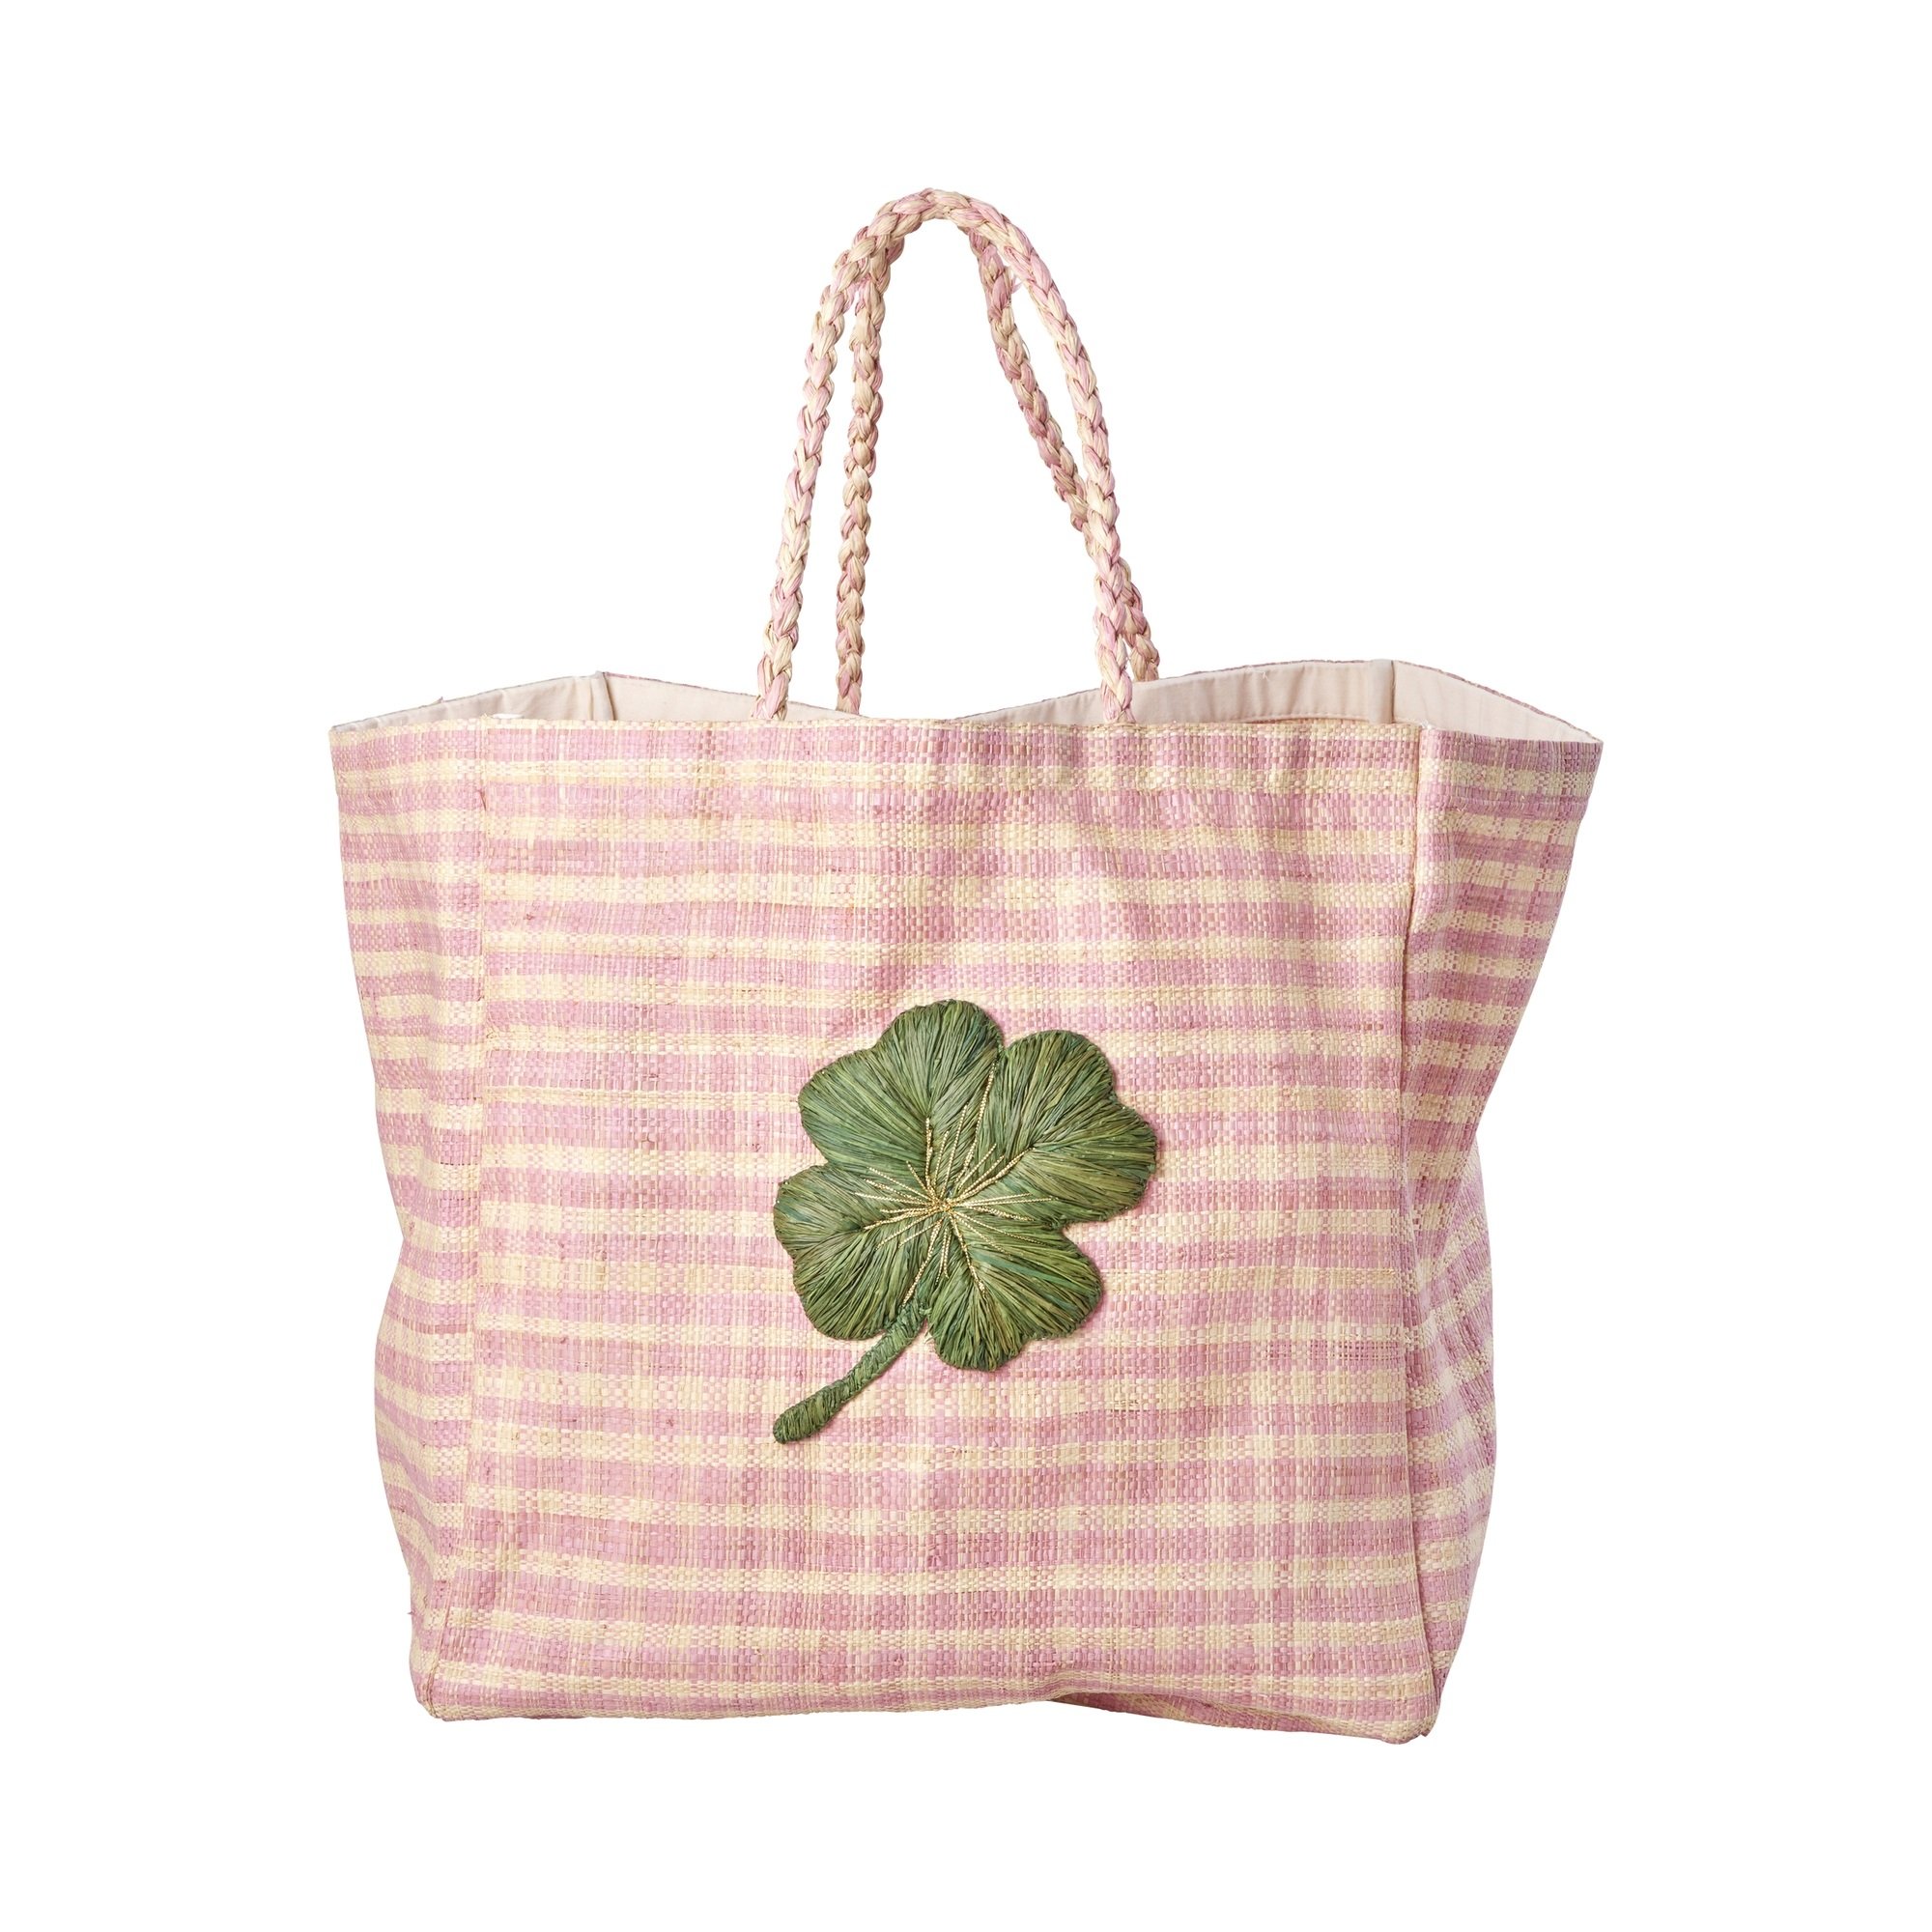 Rice - Raffia Shopping Bag Green Clover Embroidery in Pink and Nature Checks